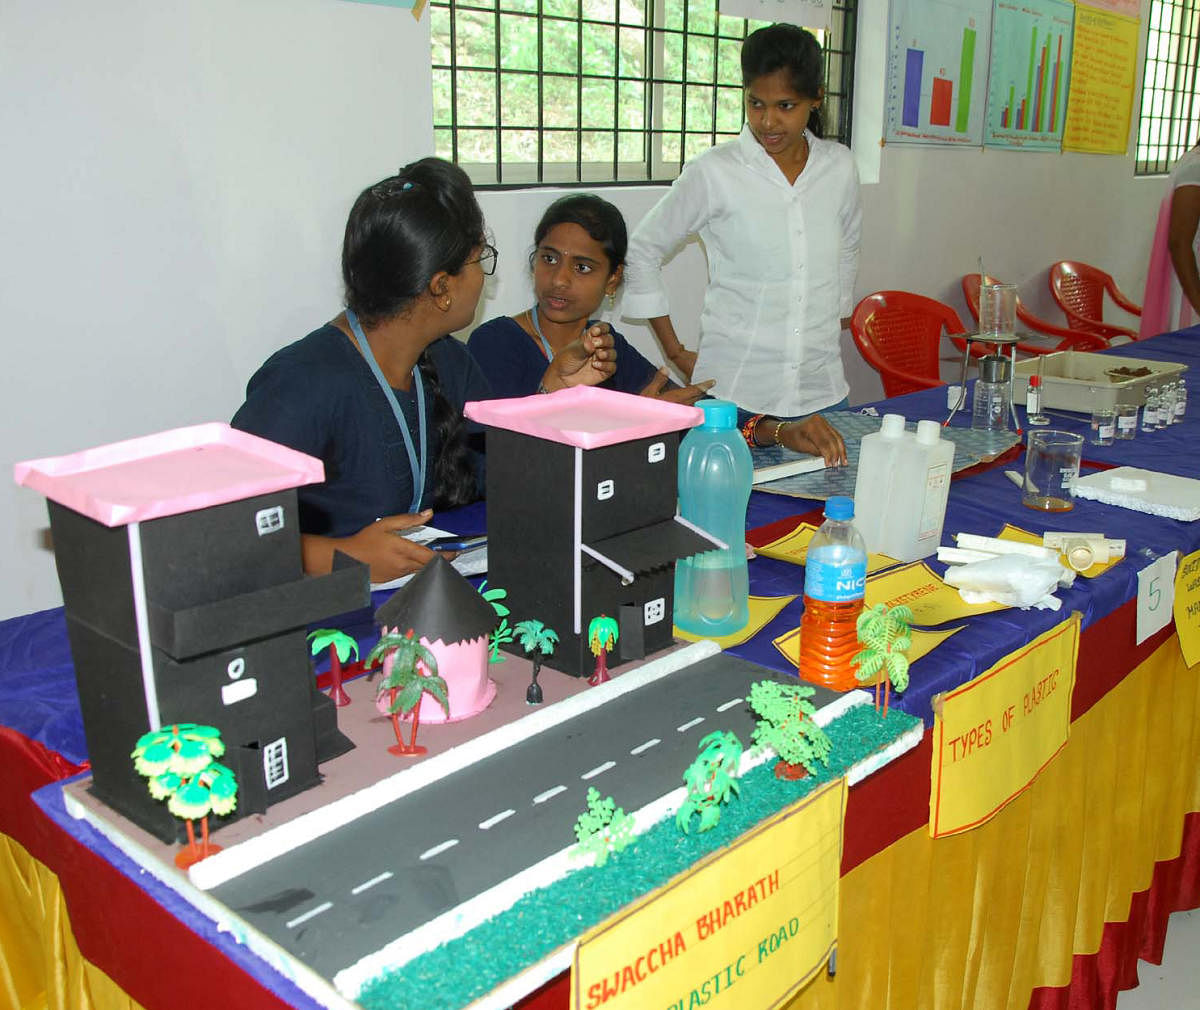 A model on the use of plastic in road construction at the divisional-level science model exhibition organised for undergraduates at AIT in Chikkamagaluru.